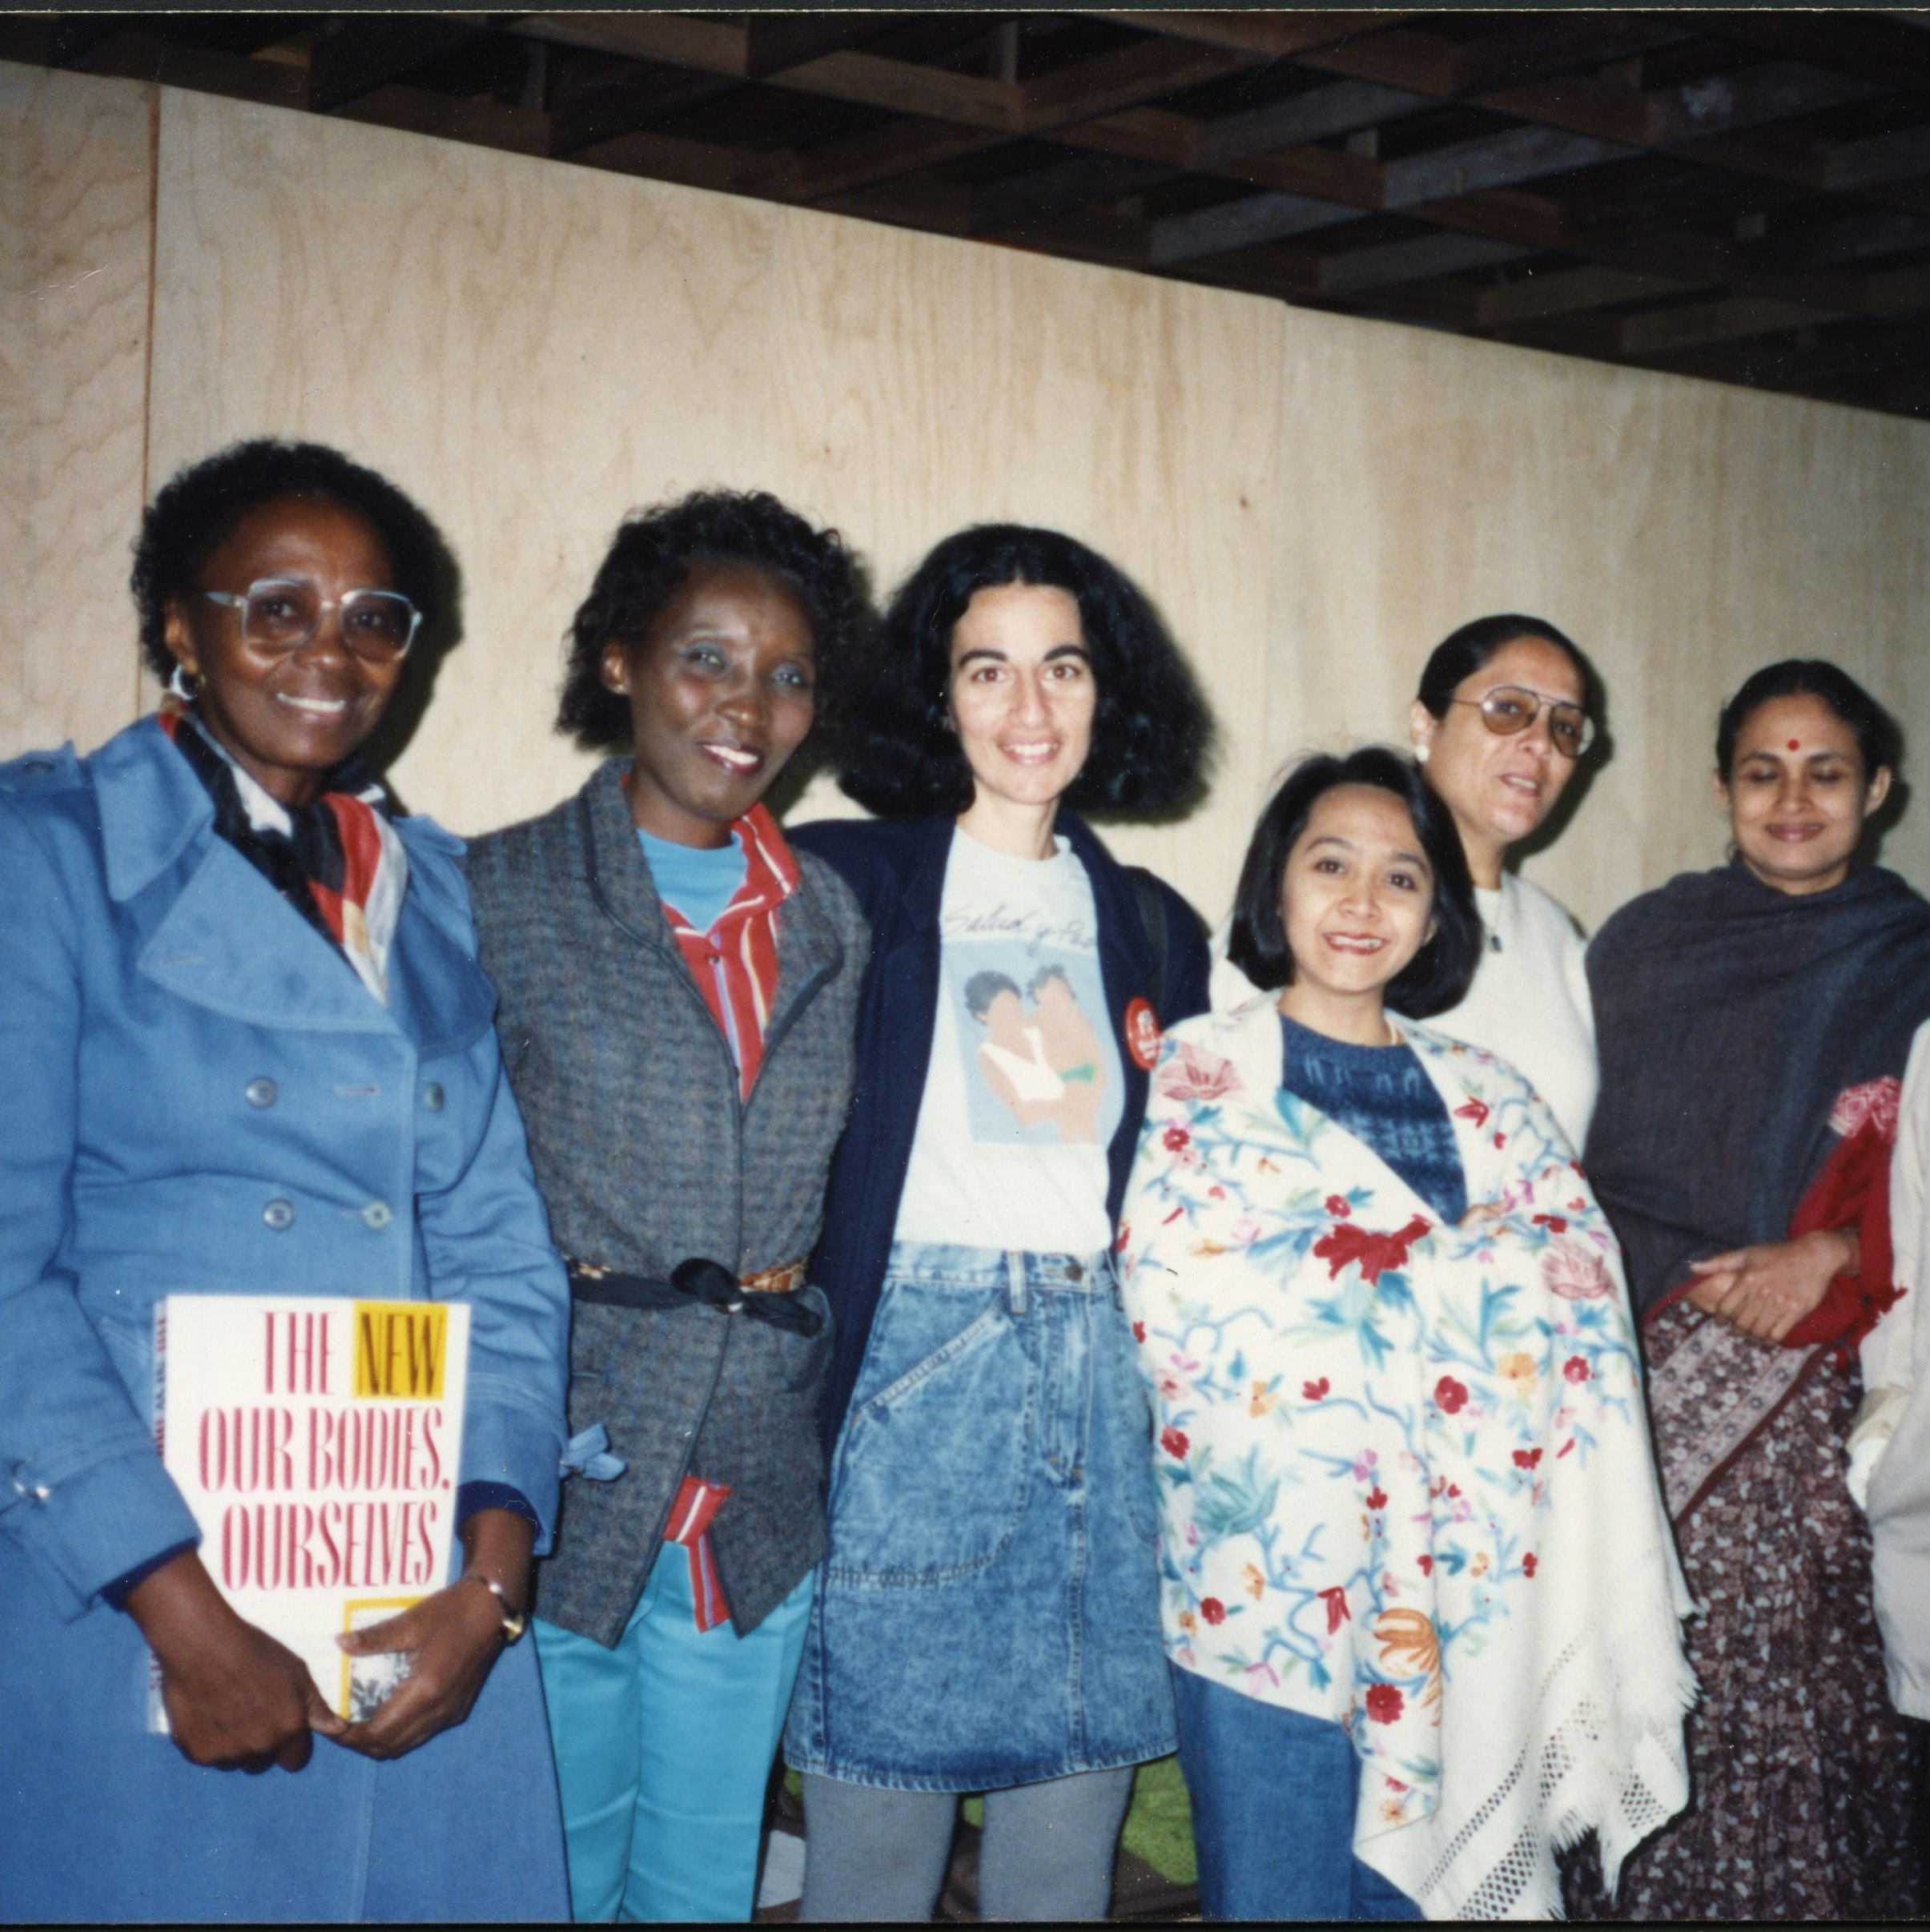 Group of women at International Women's Health Coalition (IWHC)/World Health Organization meeting, holding a copy of The New Our Bodies, Ourselves